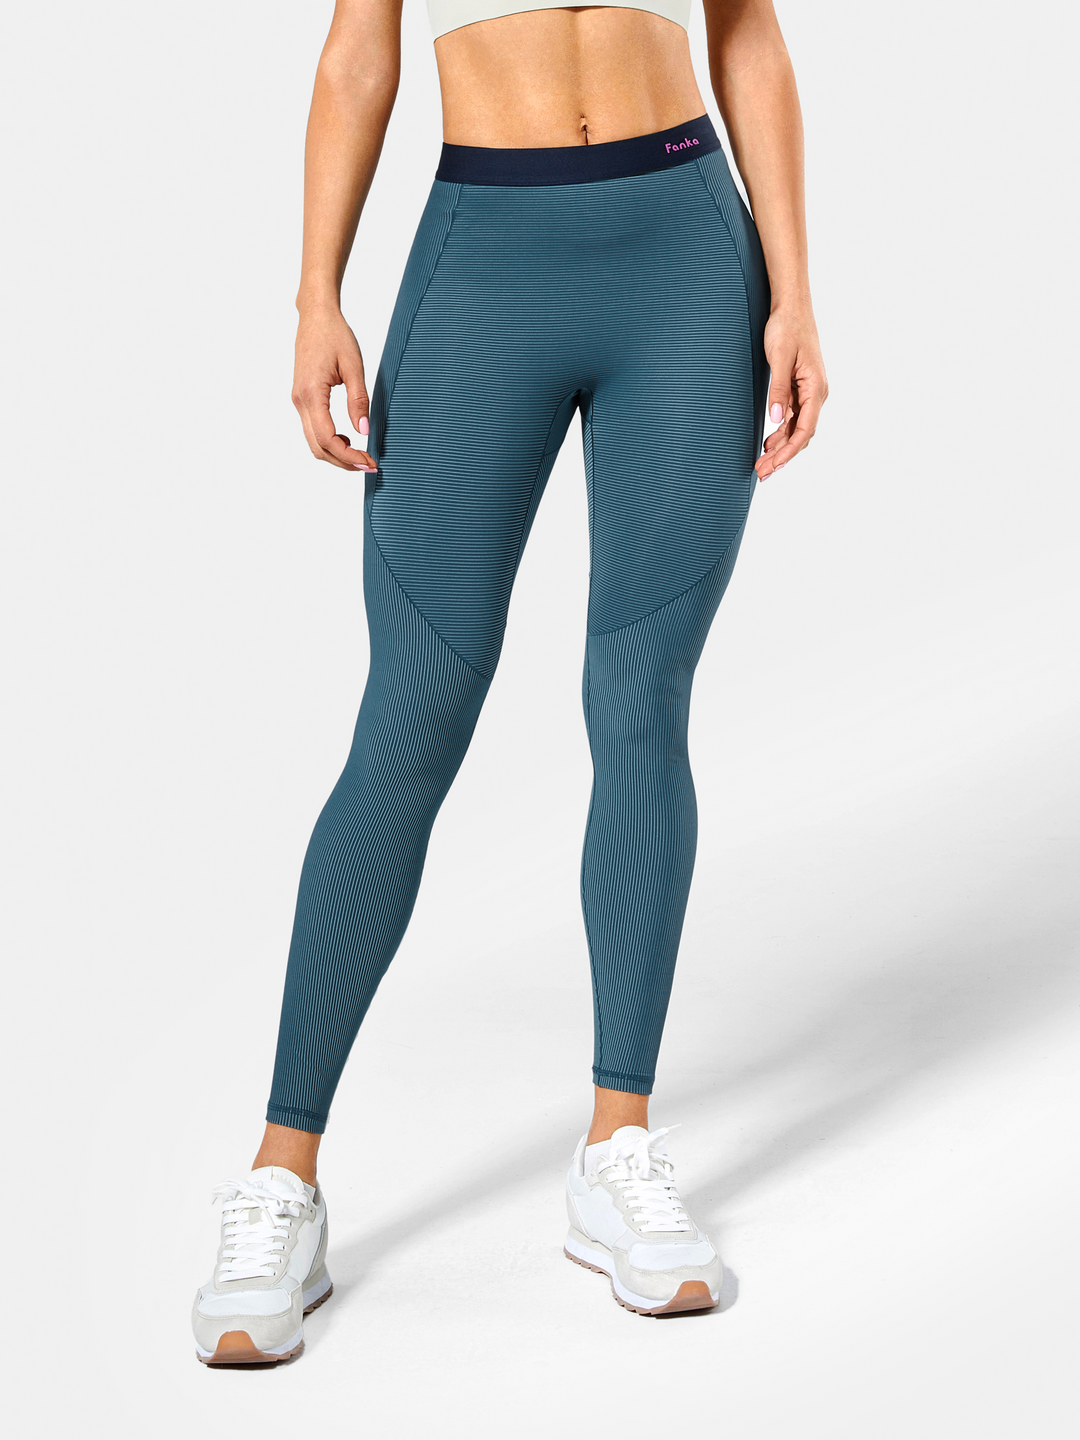 Fanka Lift n Curve Collection  Women's Leggings Ready for